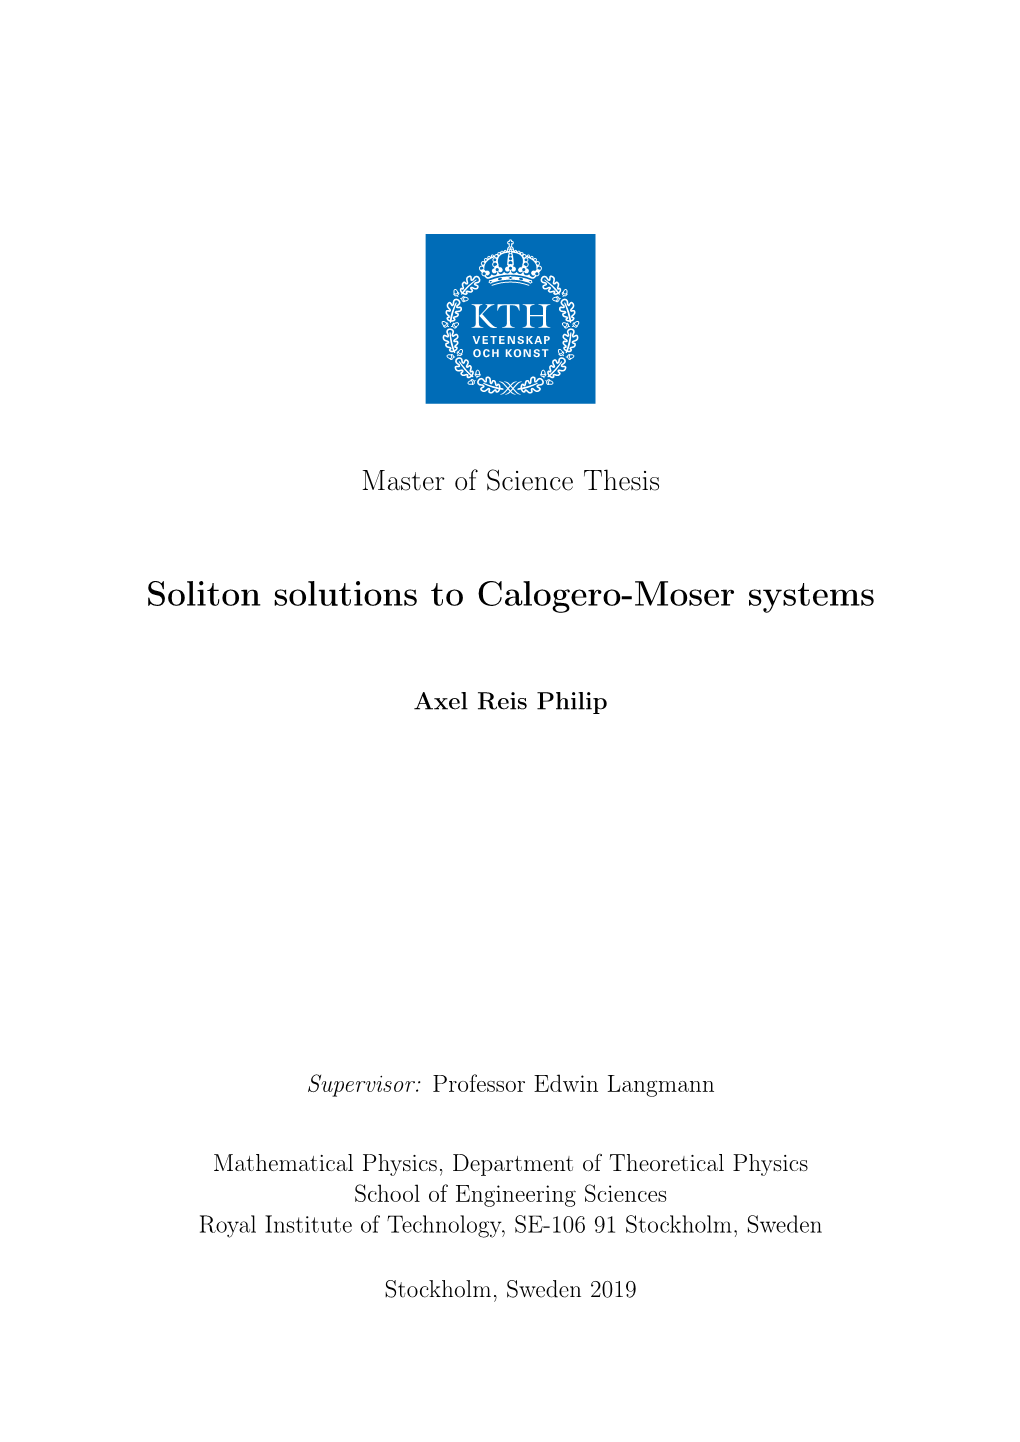 Soliton Solutions to Calogero-Moser Systems